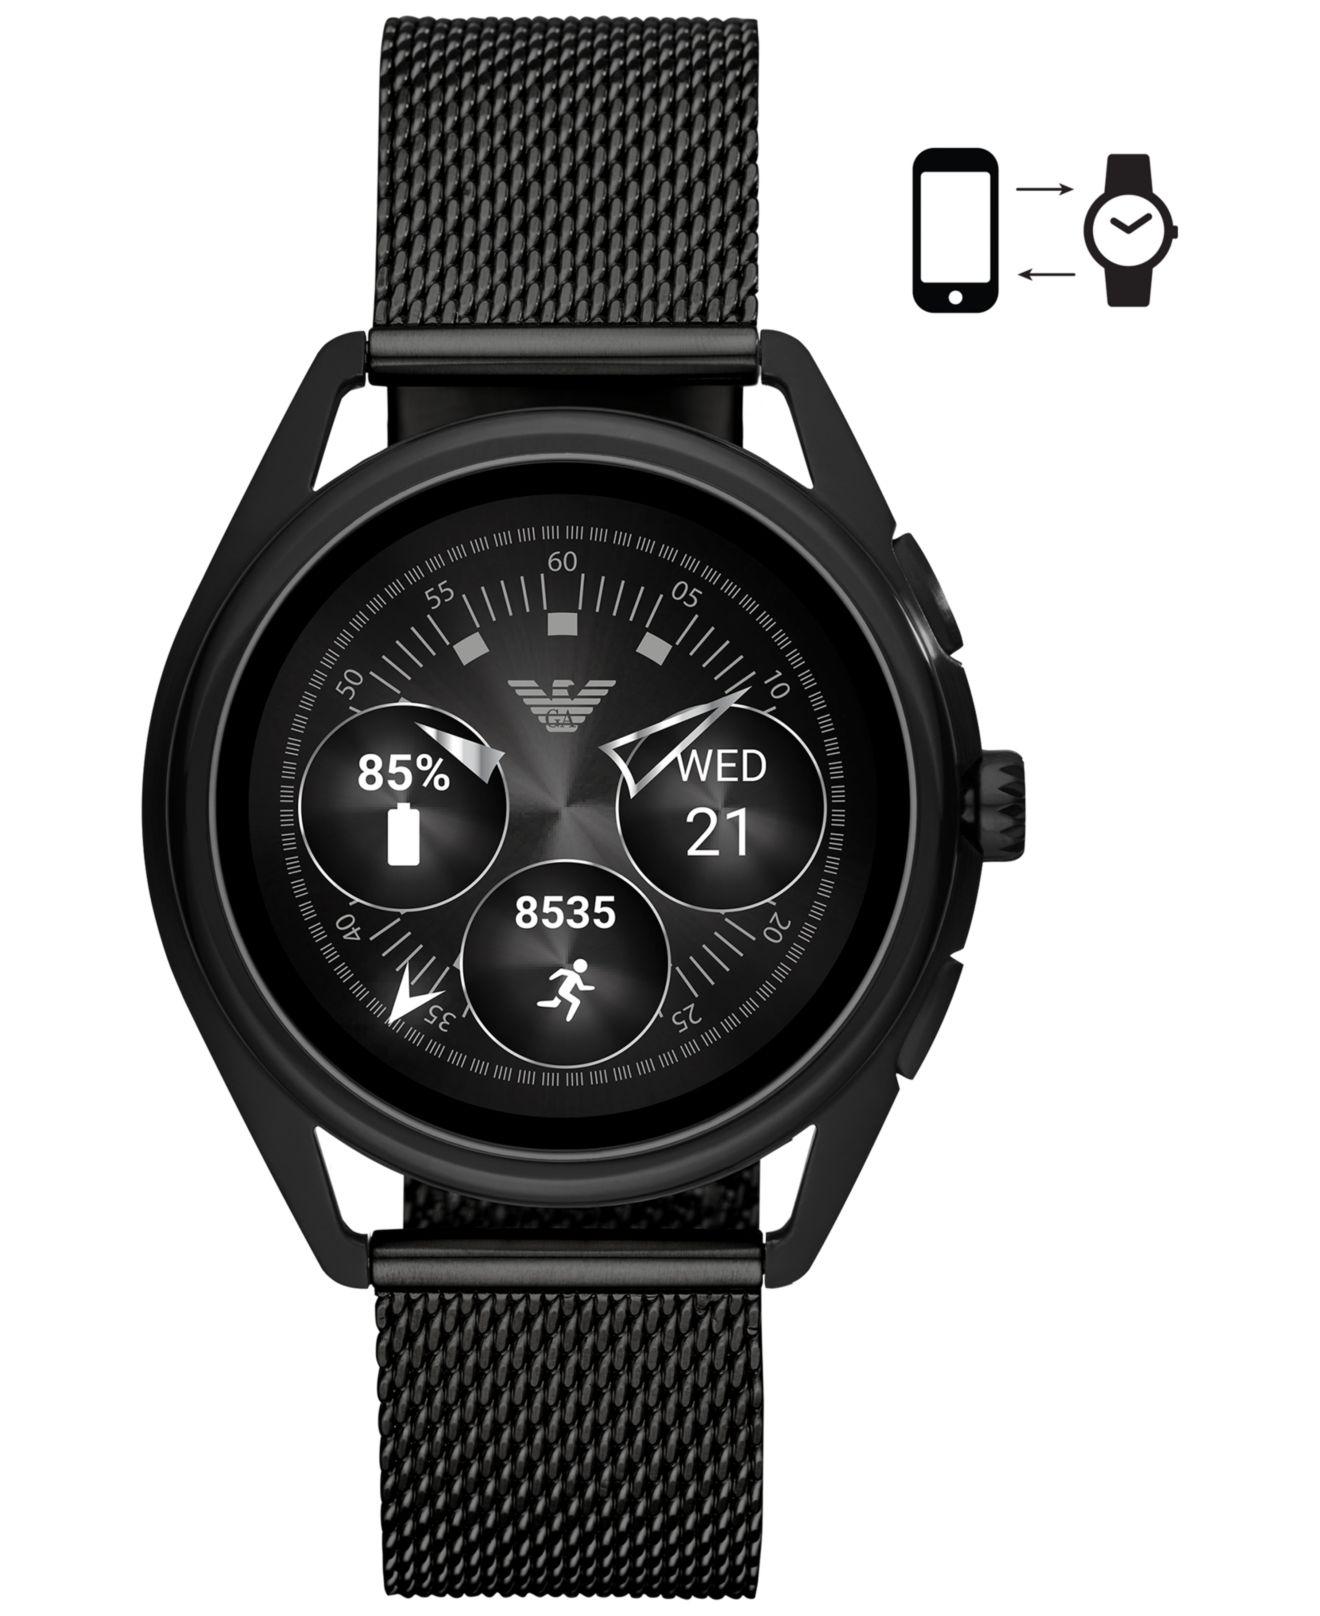 touch screen armani watch